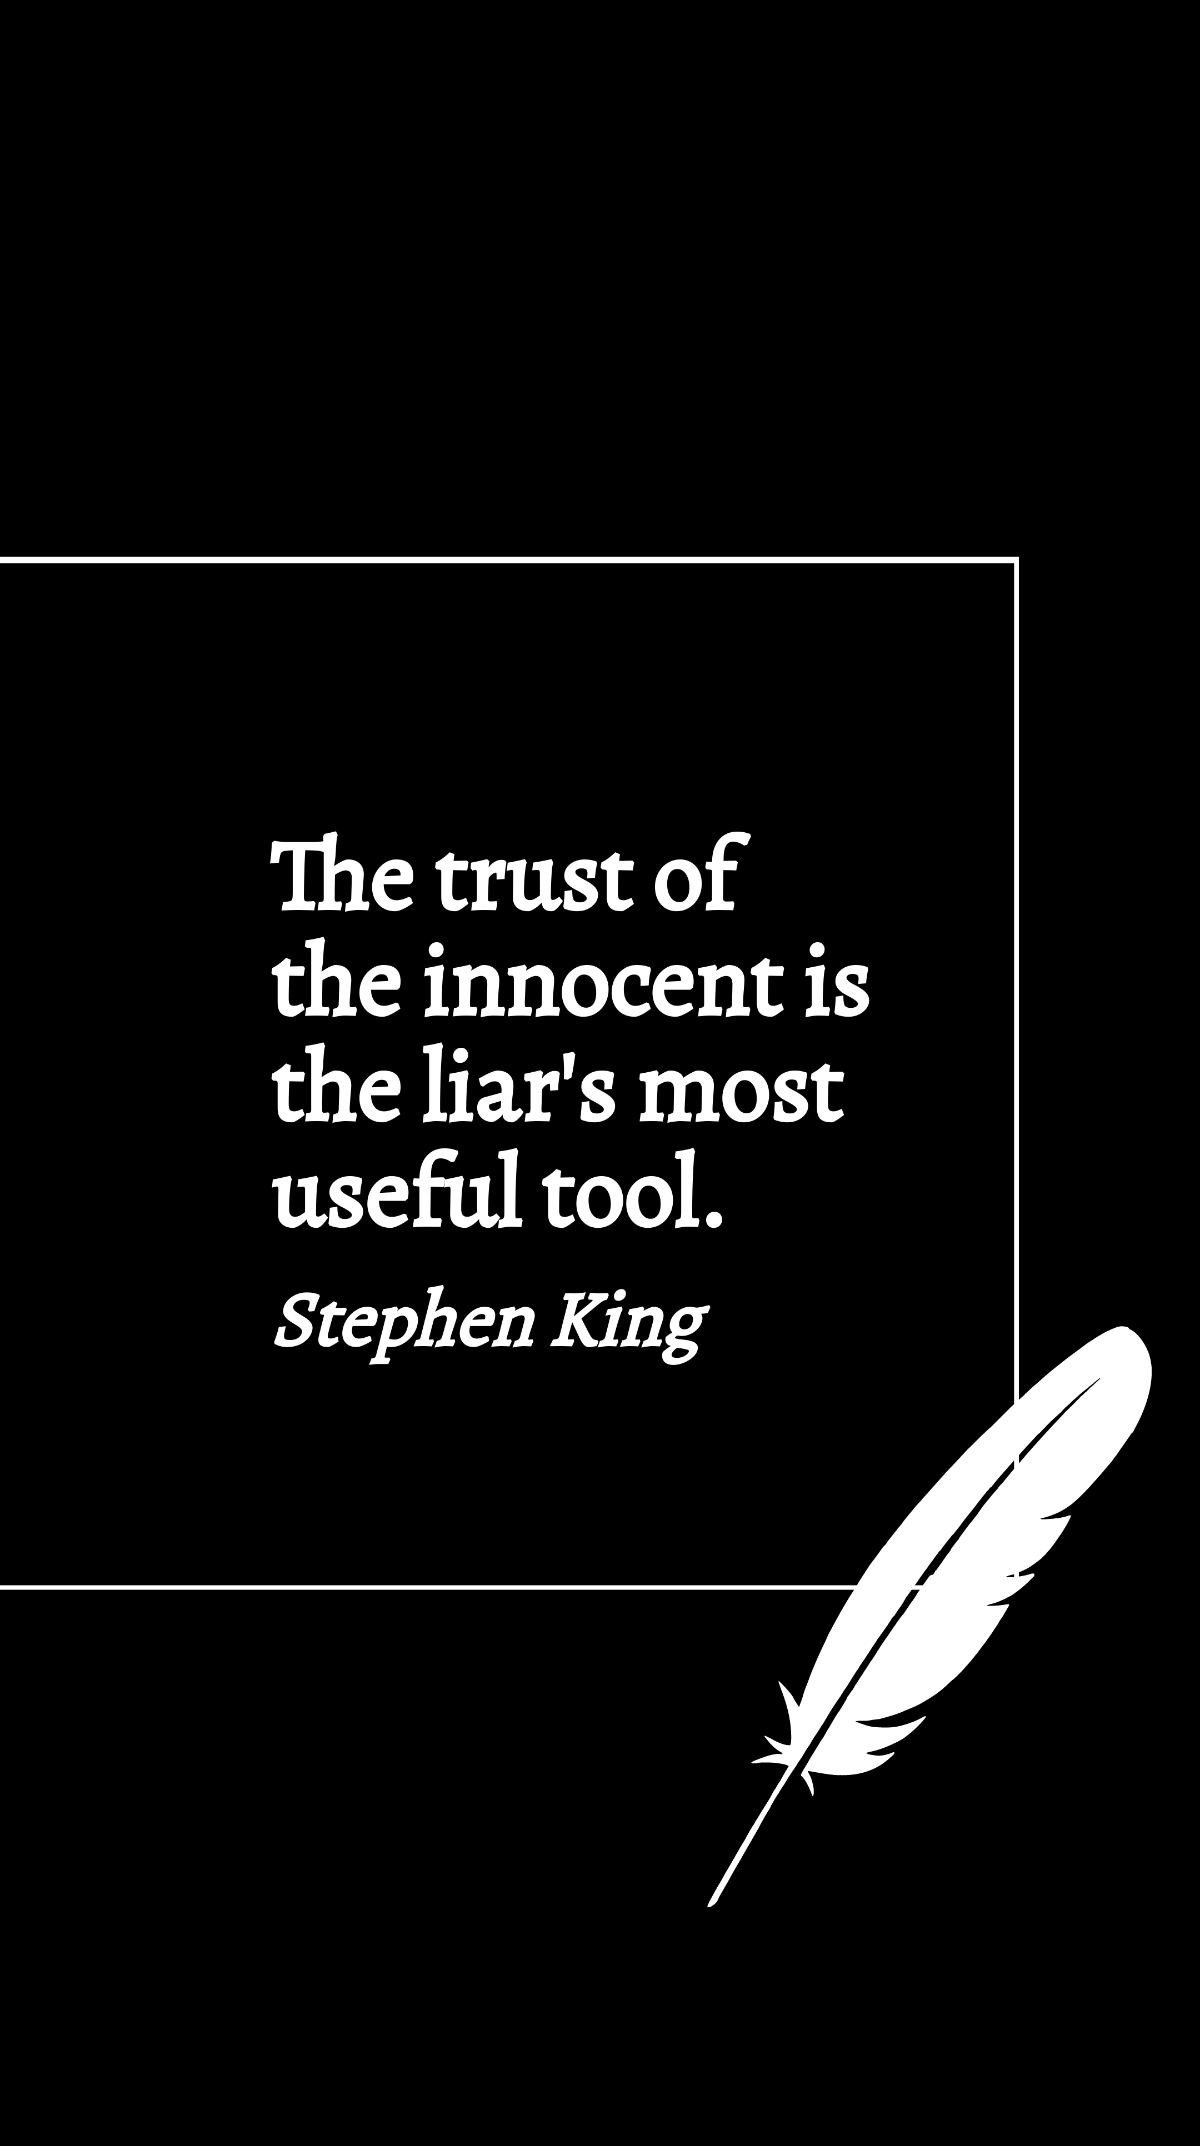 Free Stephen King - The trust of the innocent is the liar's most useful tool. Template